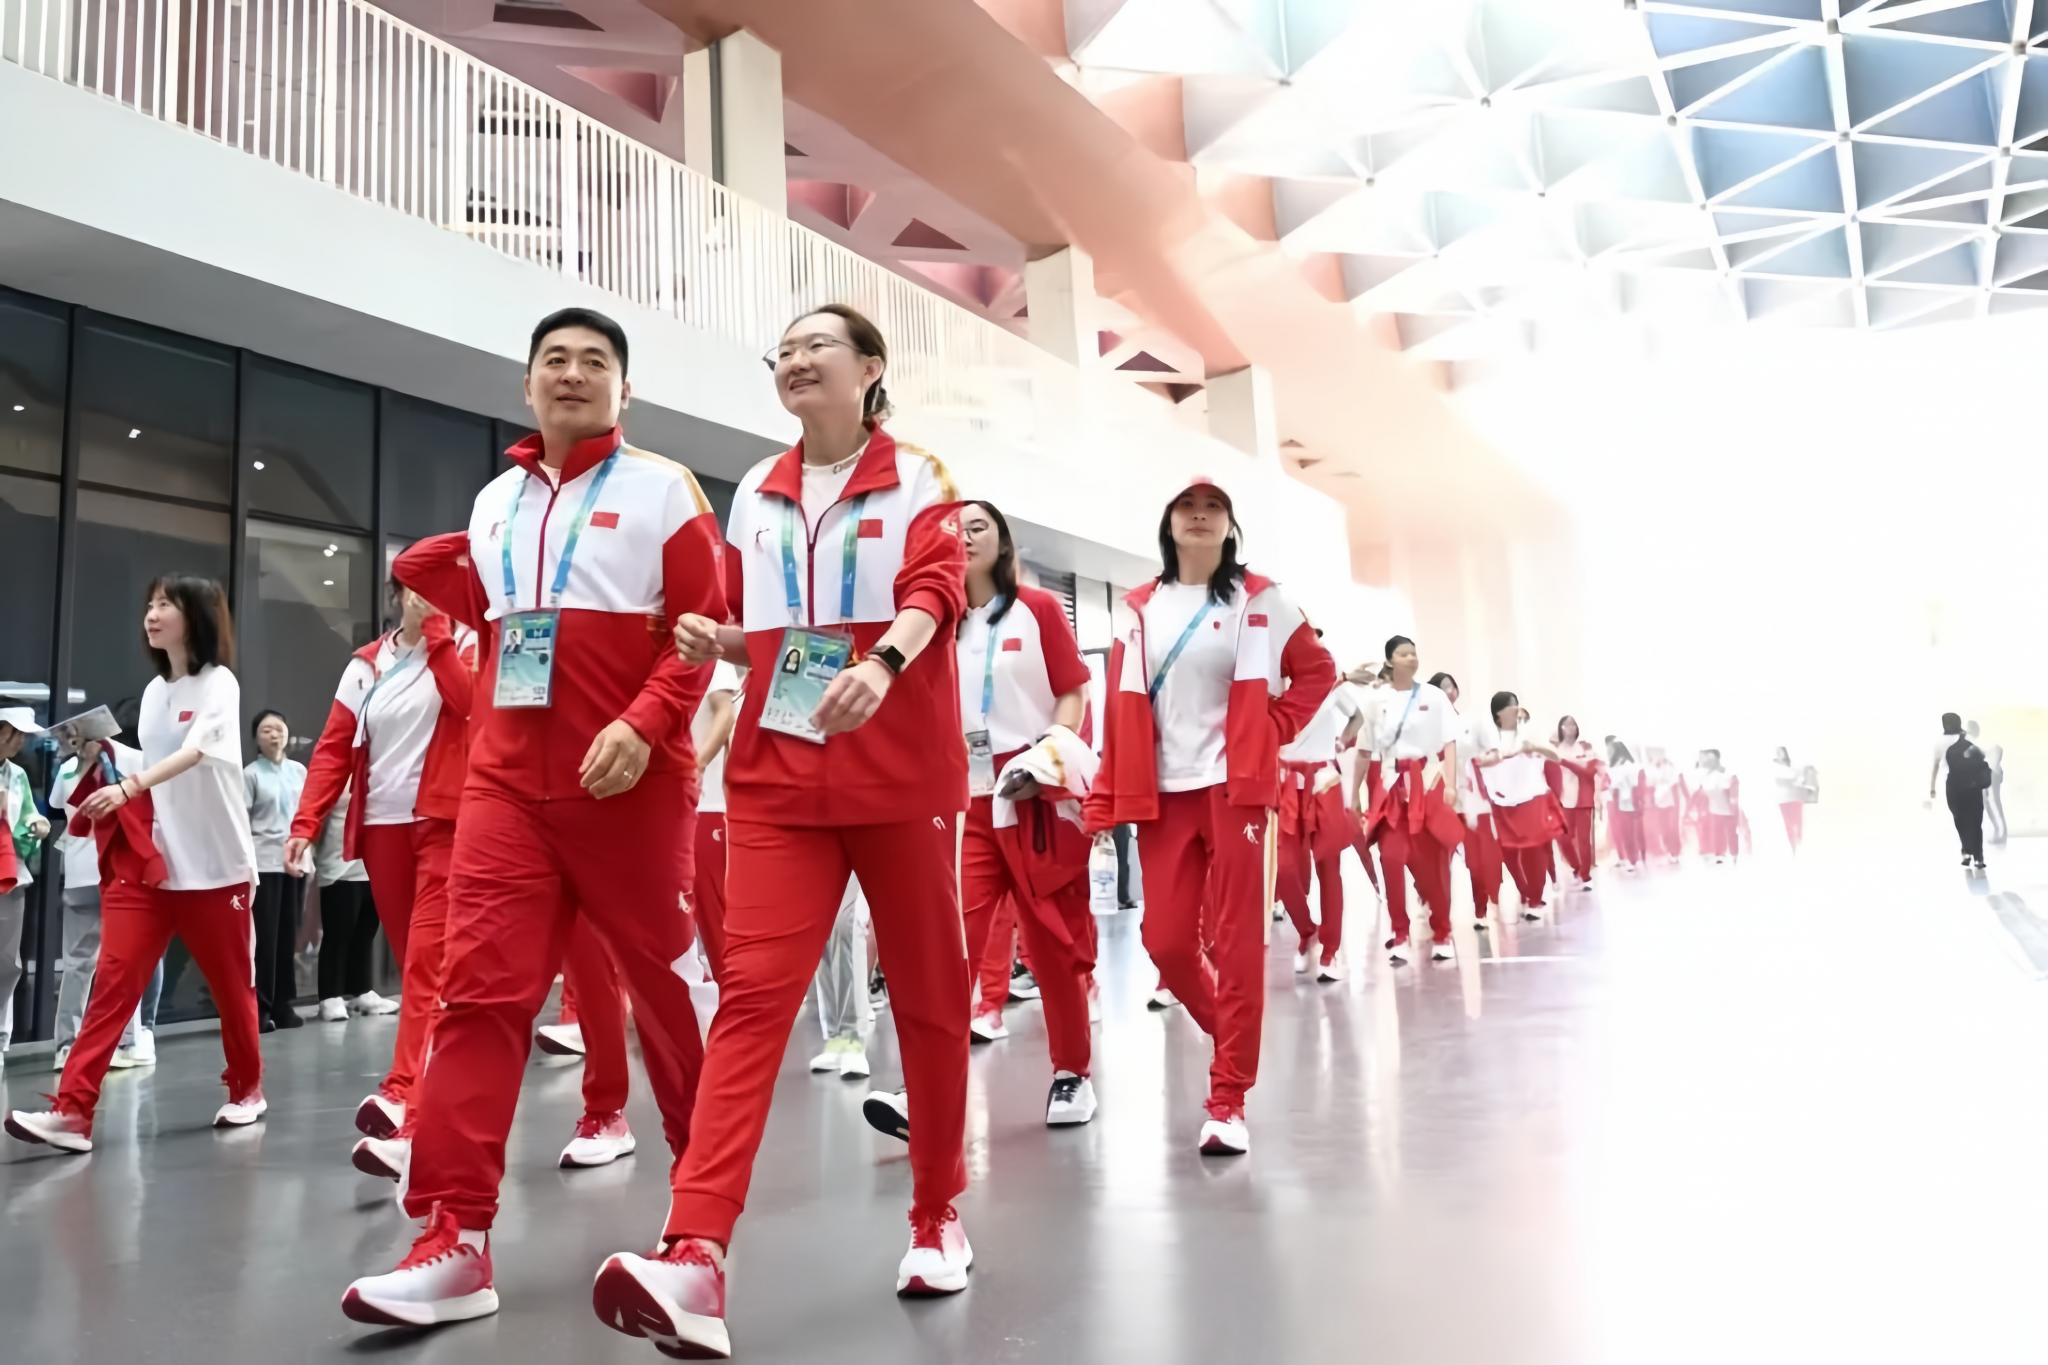 Host country China were the first country to check in to the Athletes' Village for the FISU Summer World University Games, due to open in Chengdu in Friday ©Chengdu 2021